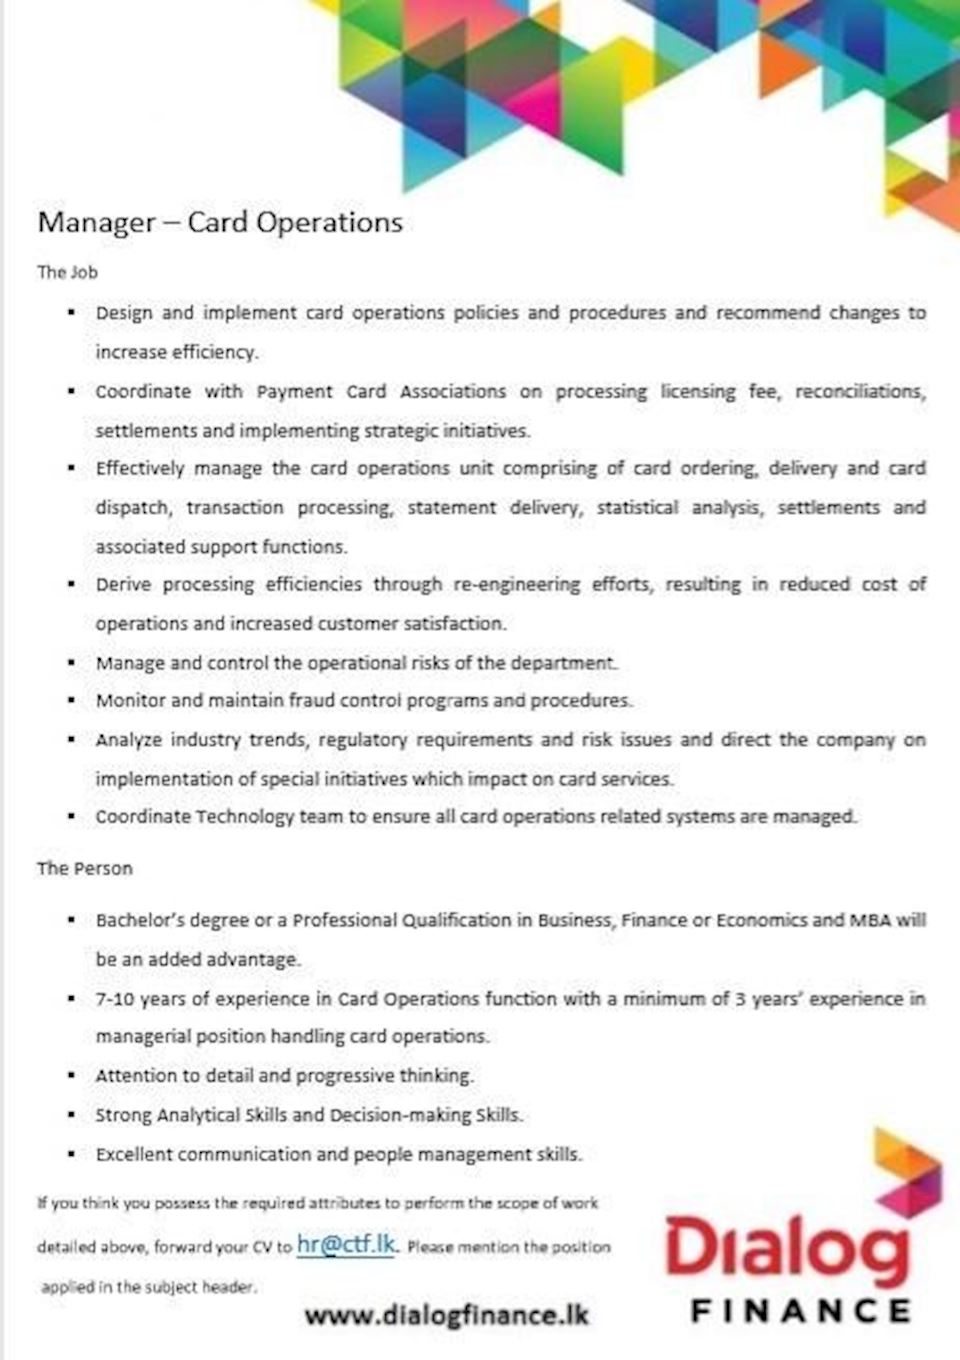 Manager - Card Operations